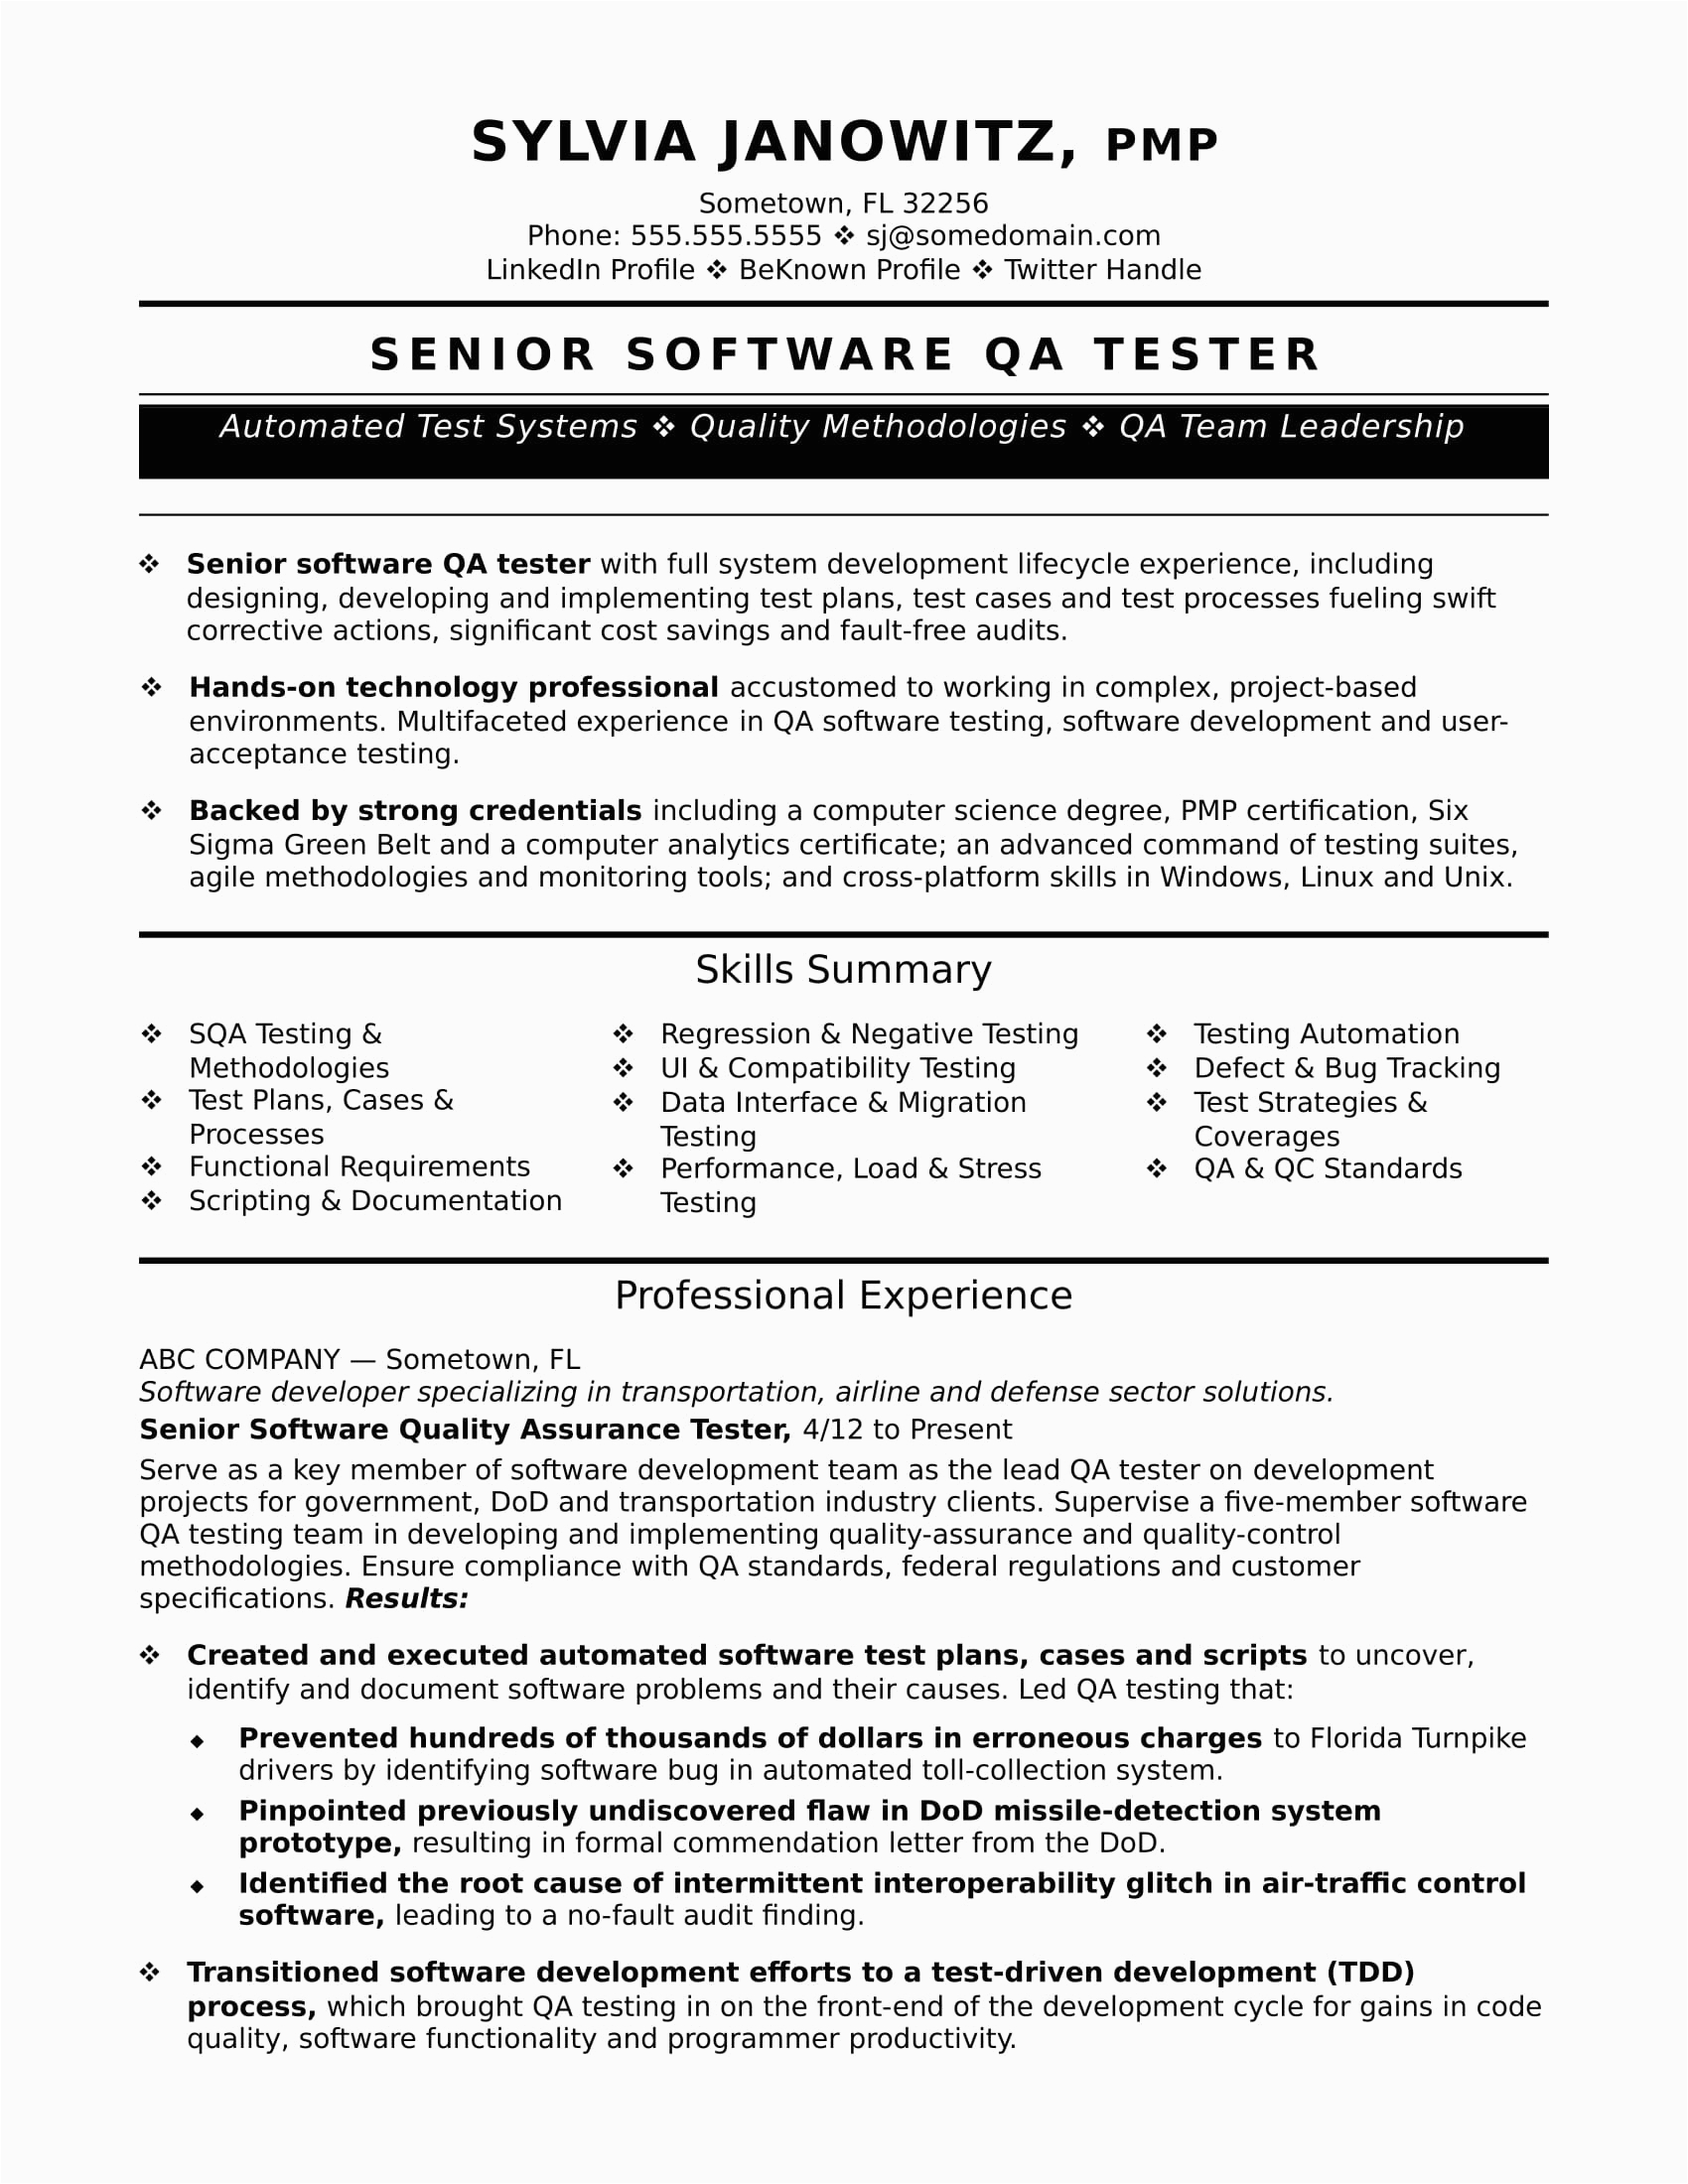 Sample Resume Of A software Tester Experienced Qa software Tester Resume Sample